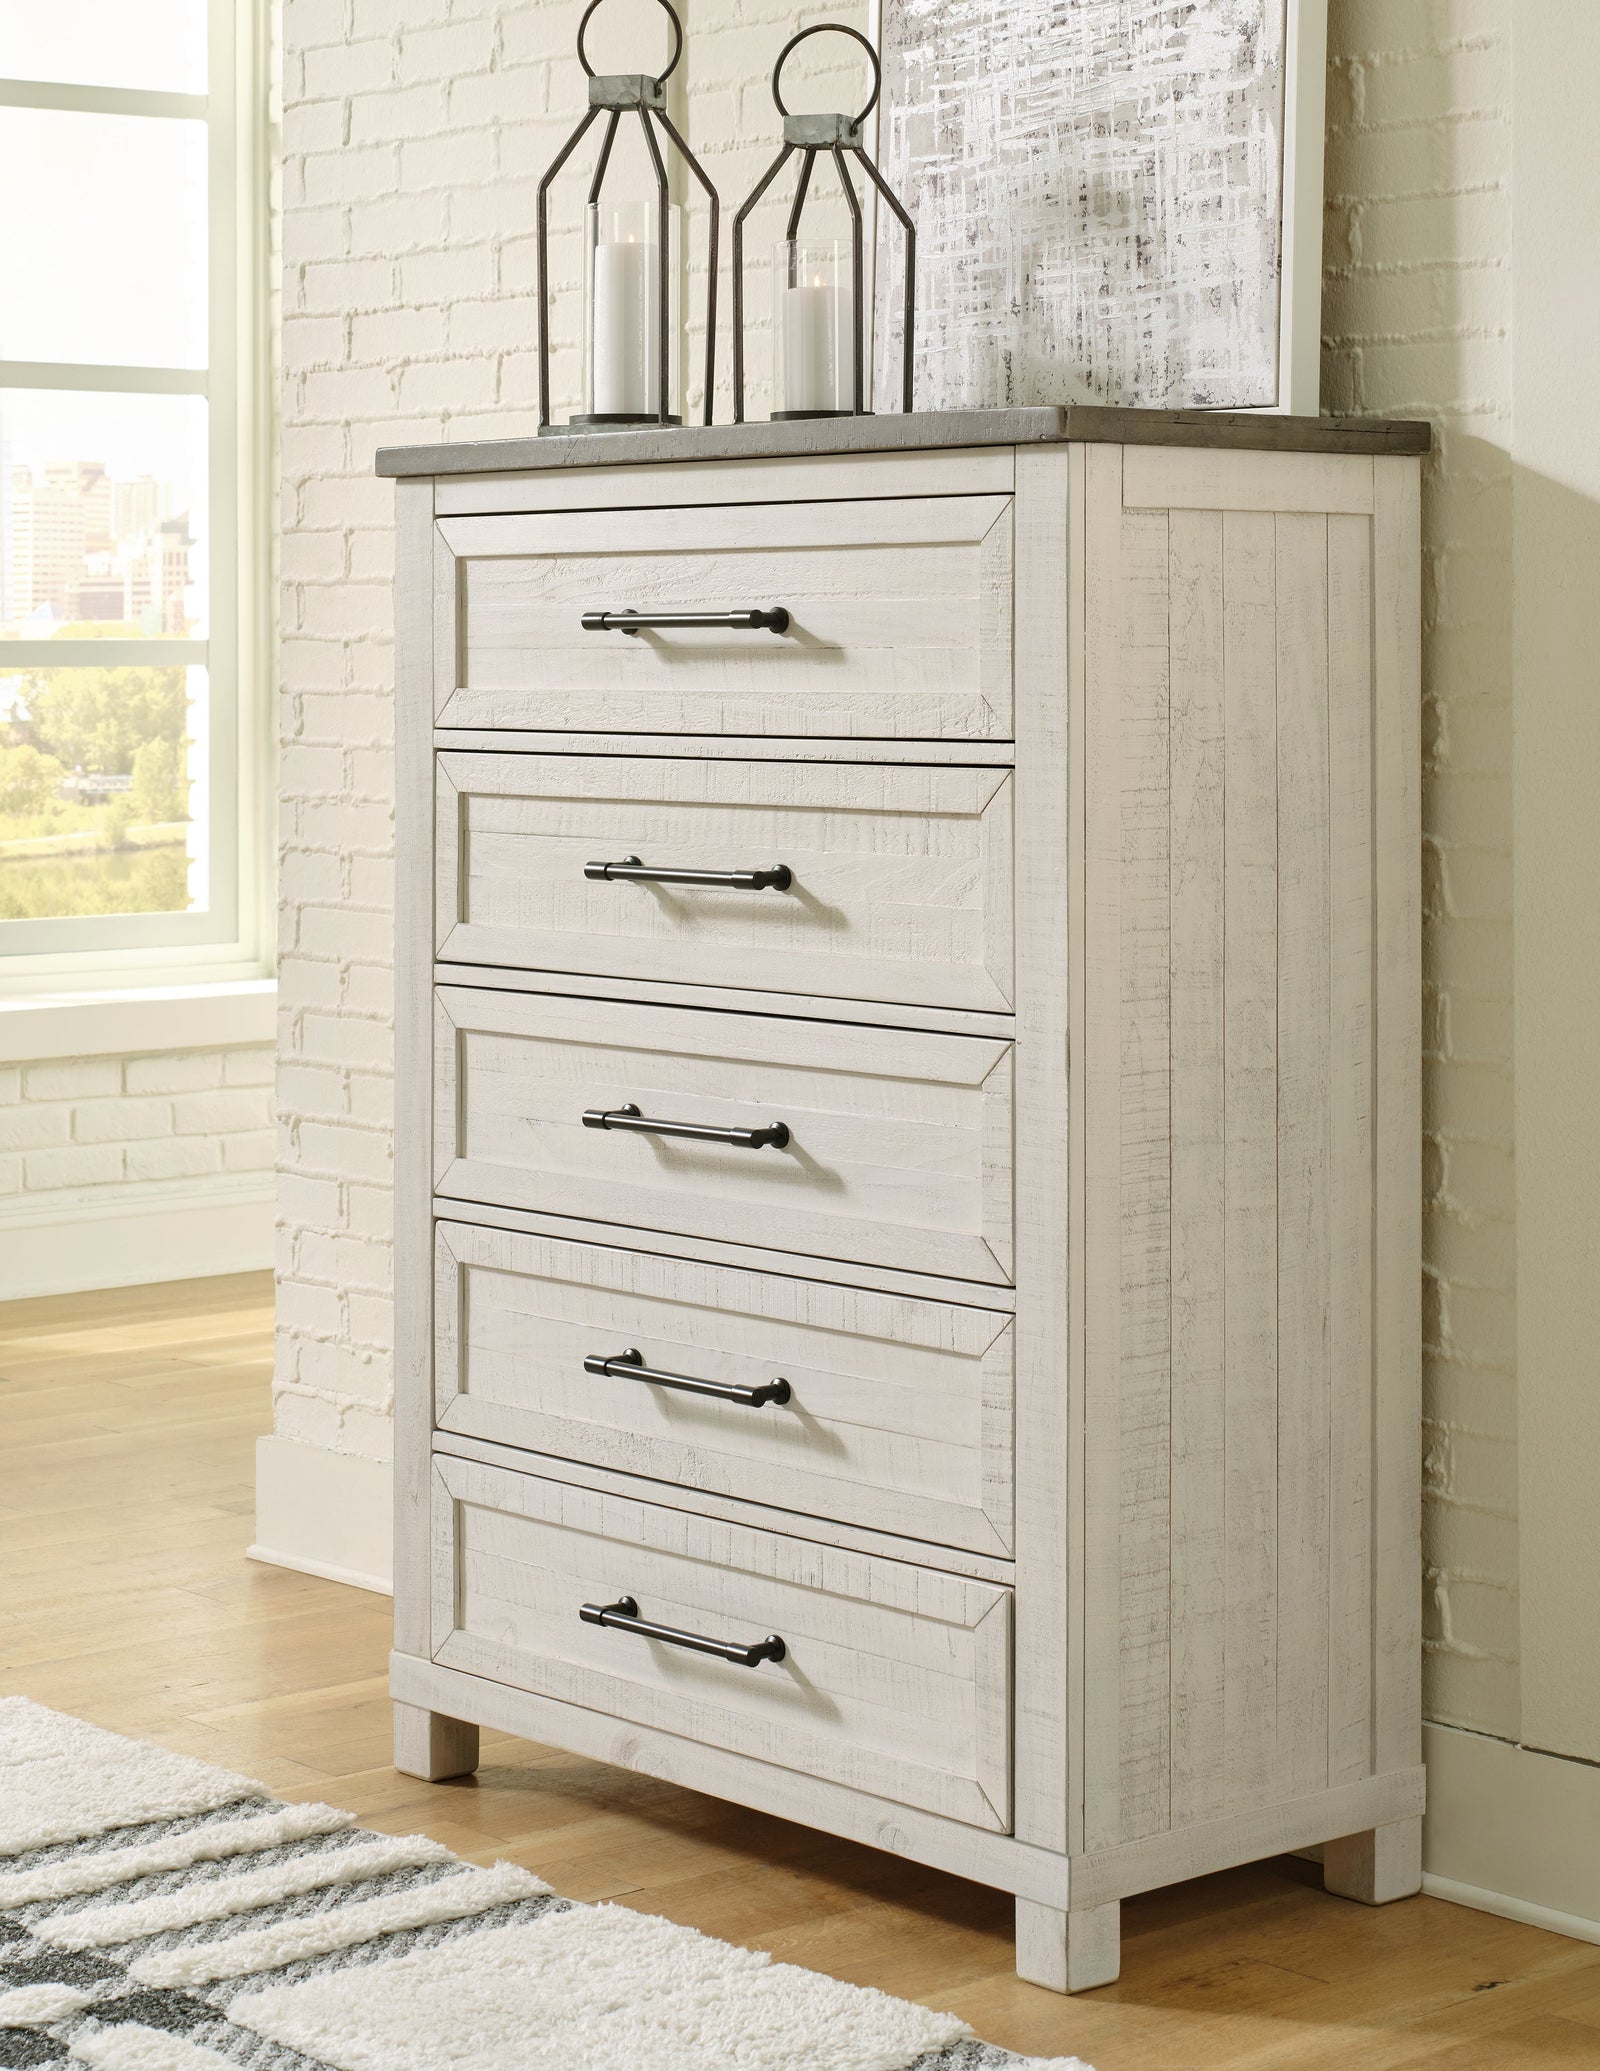 Brewgan Two-tone Chest Of Drawers